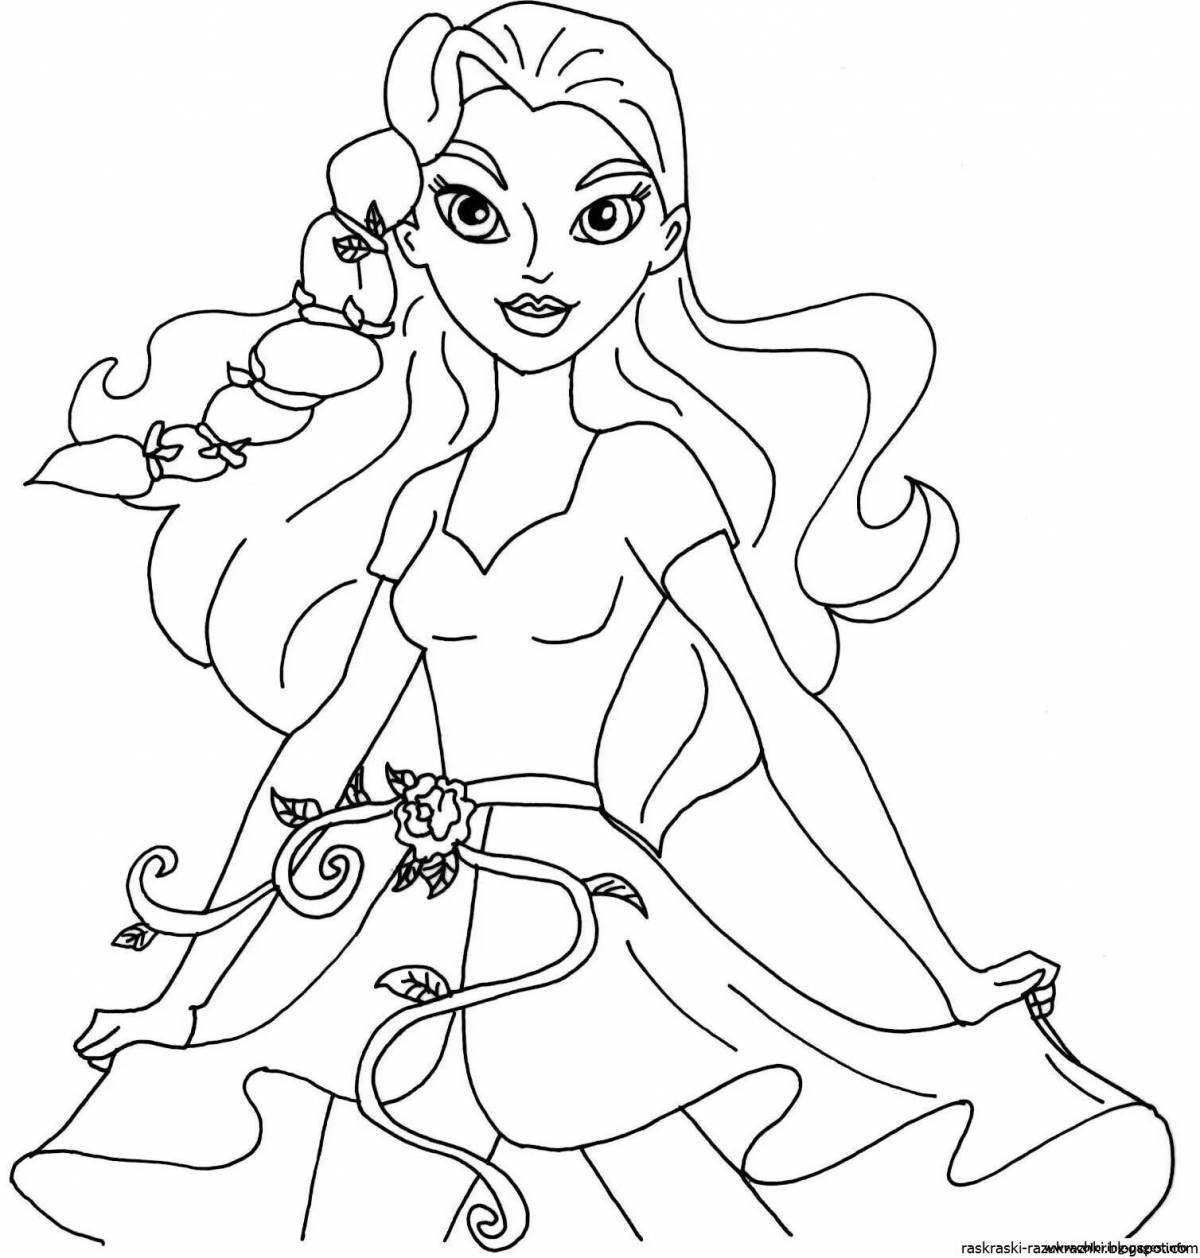 Engaging super hero high coloring page